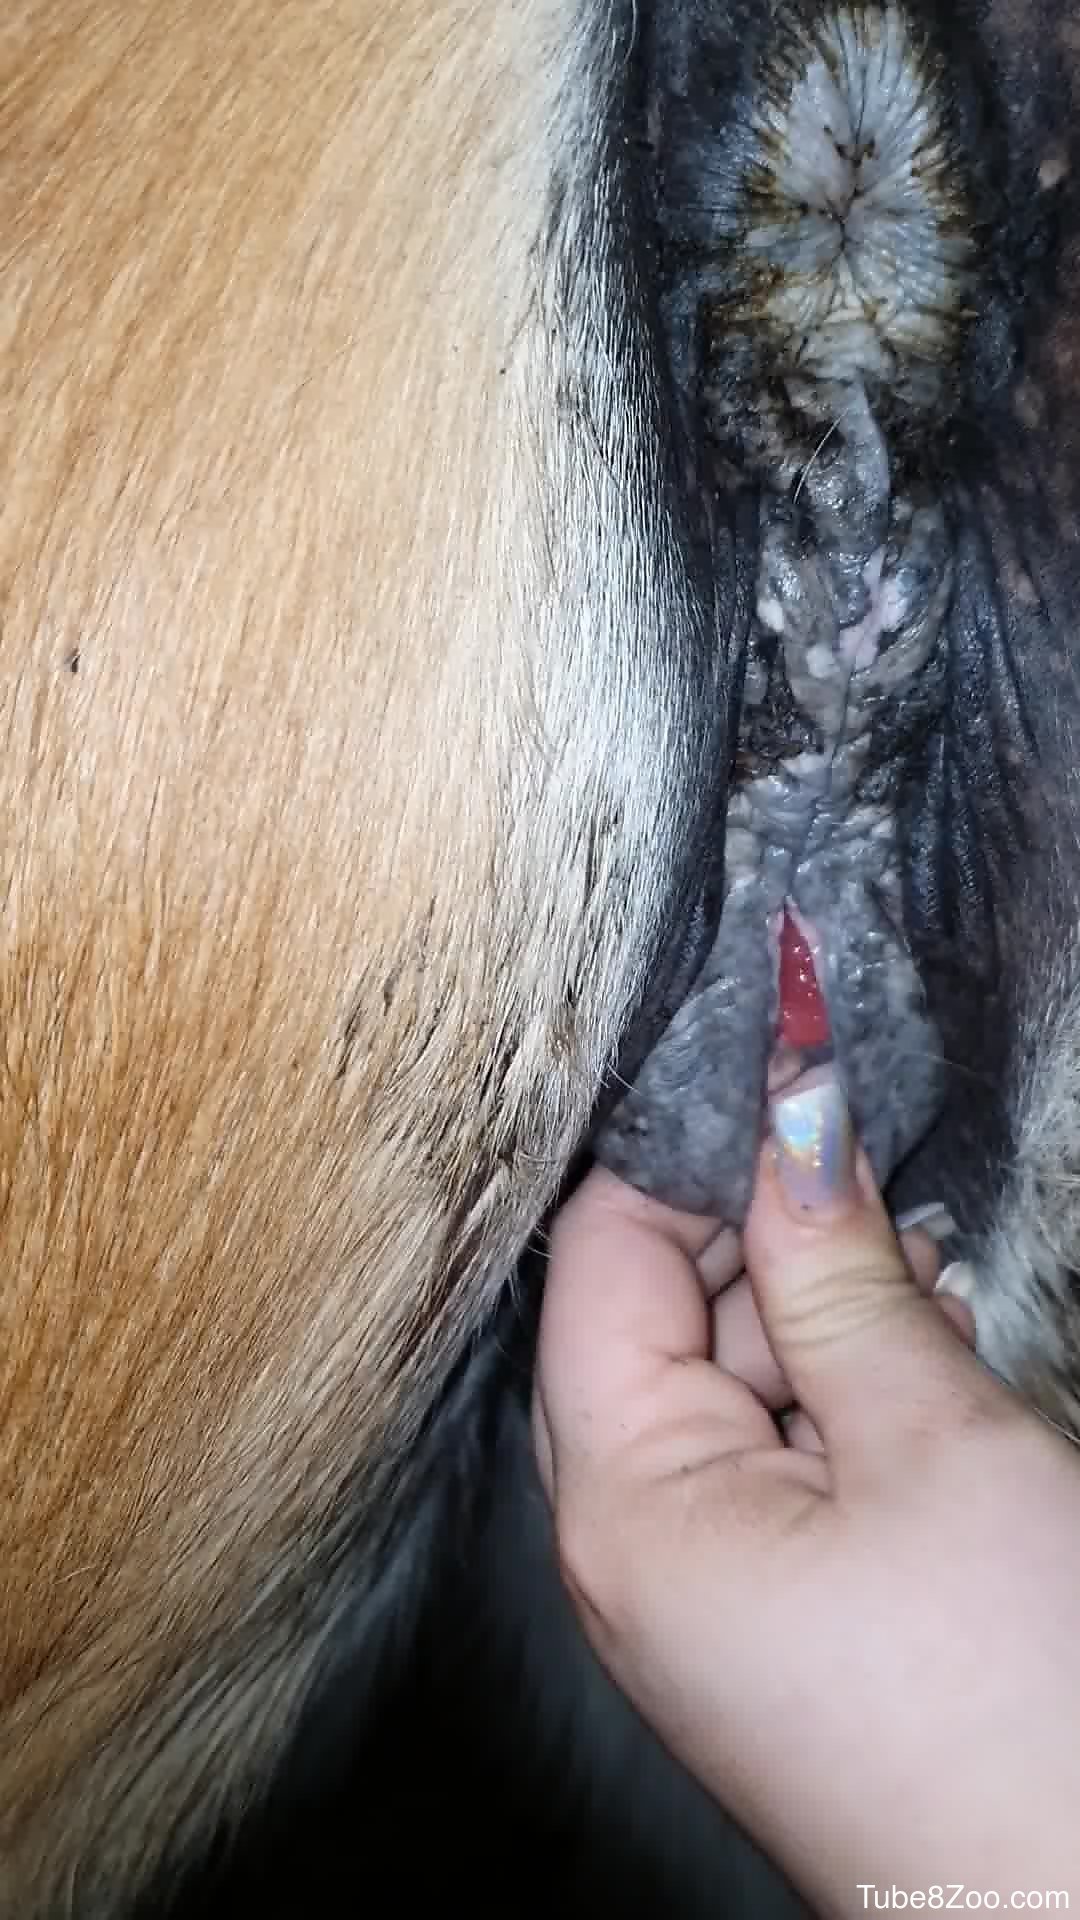 Horse pussy getting fingered in a lesbian bestiality vid